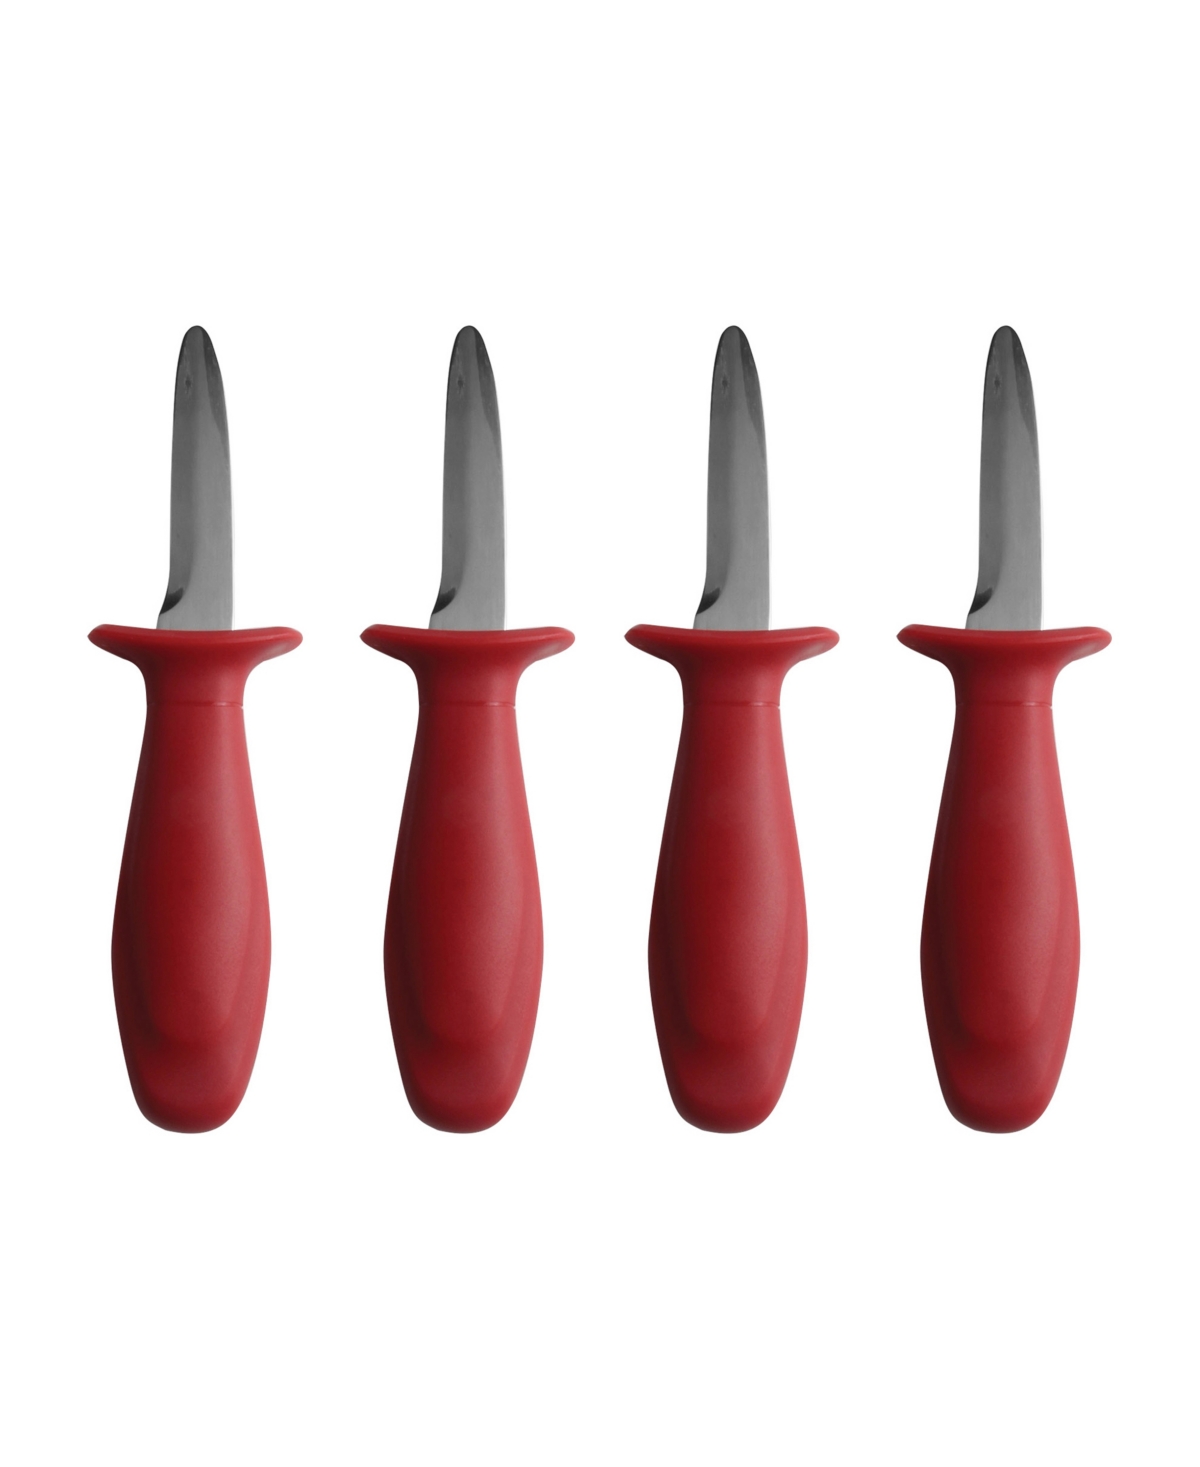 Maine Man Seafood Maine Man Set Of 4 Stainless Steel Clam Knife In Red